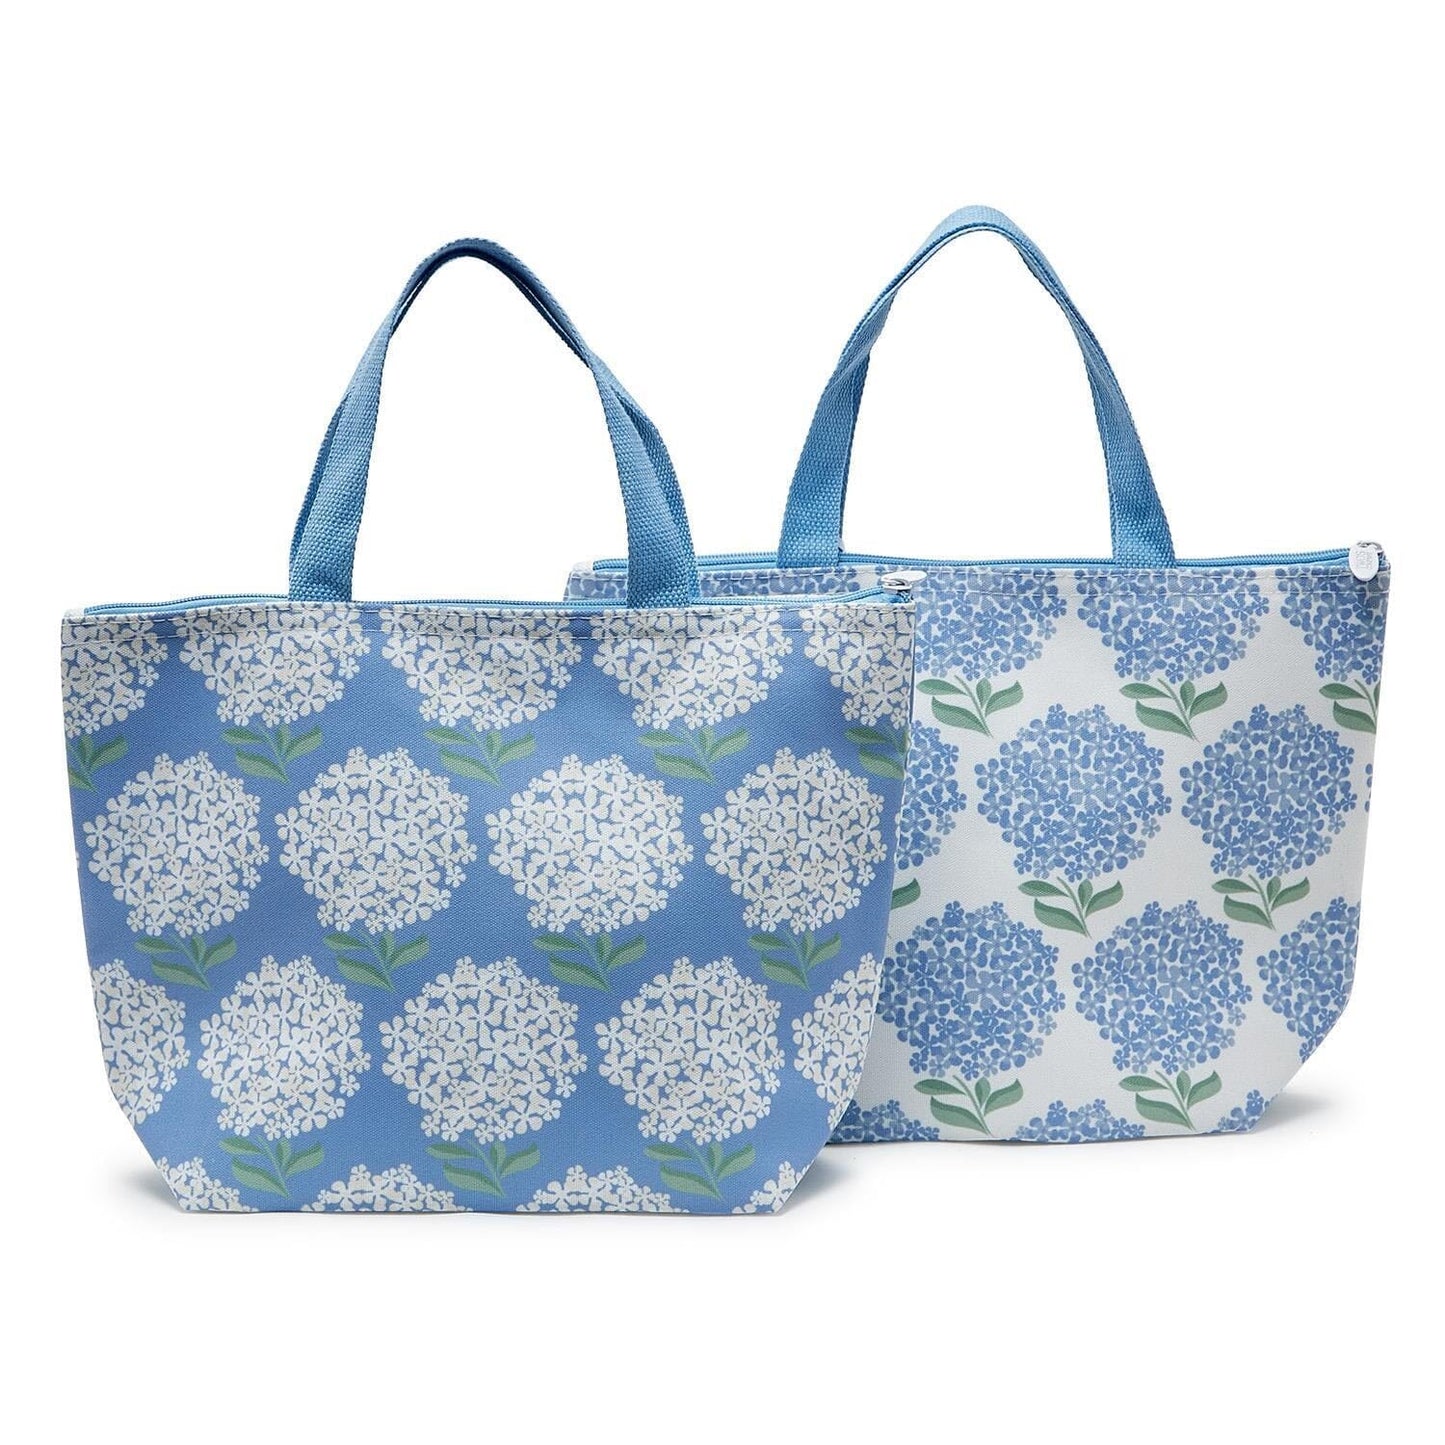 Hydrangea Thermal Lunch Tote Bag (Multiple Colors)